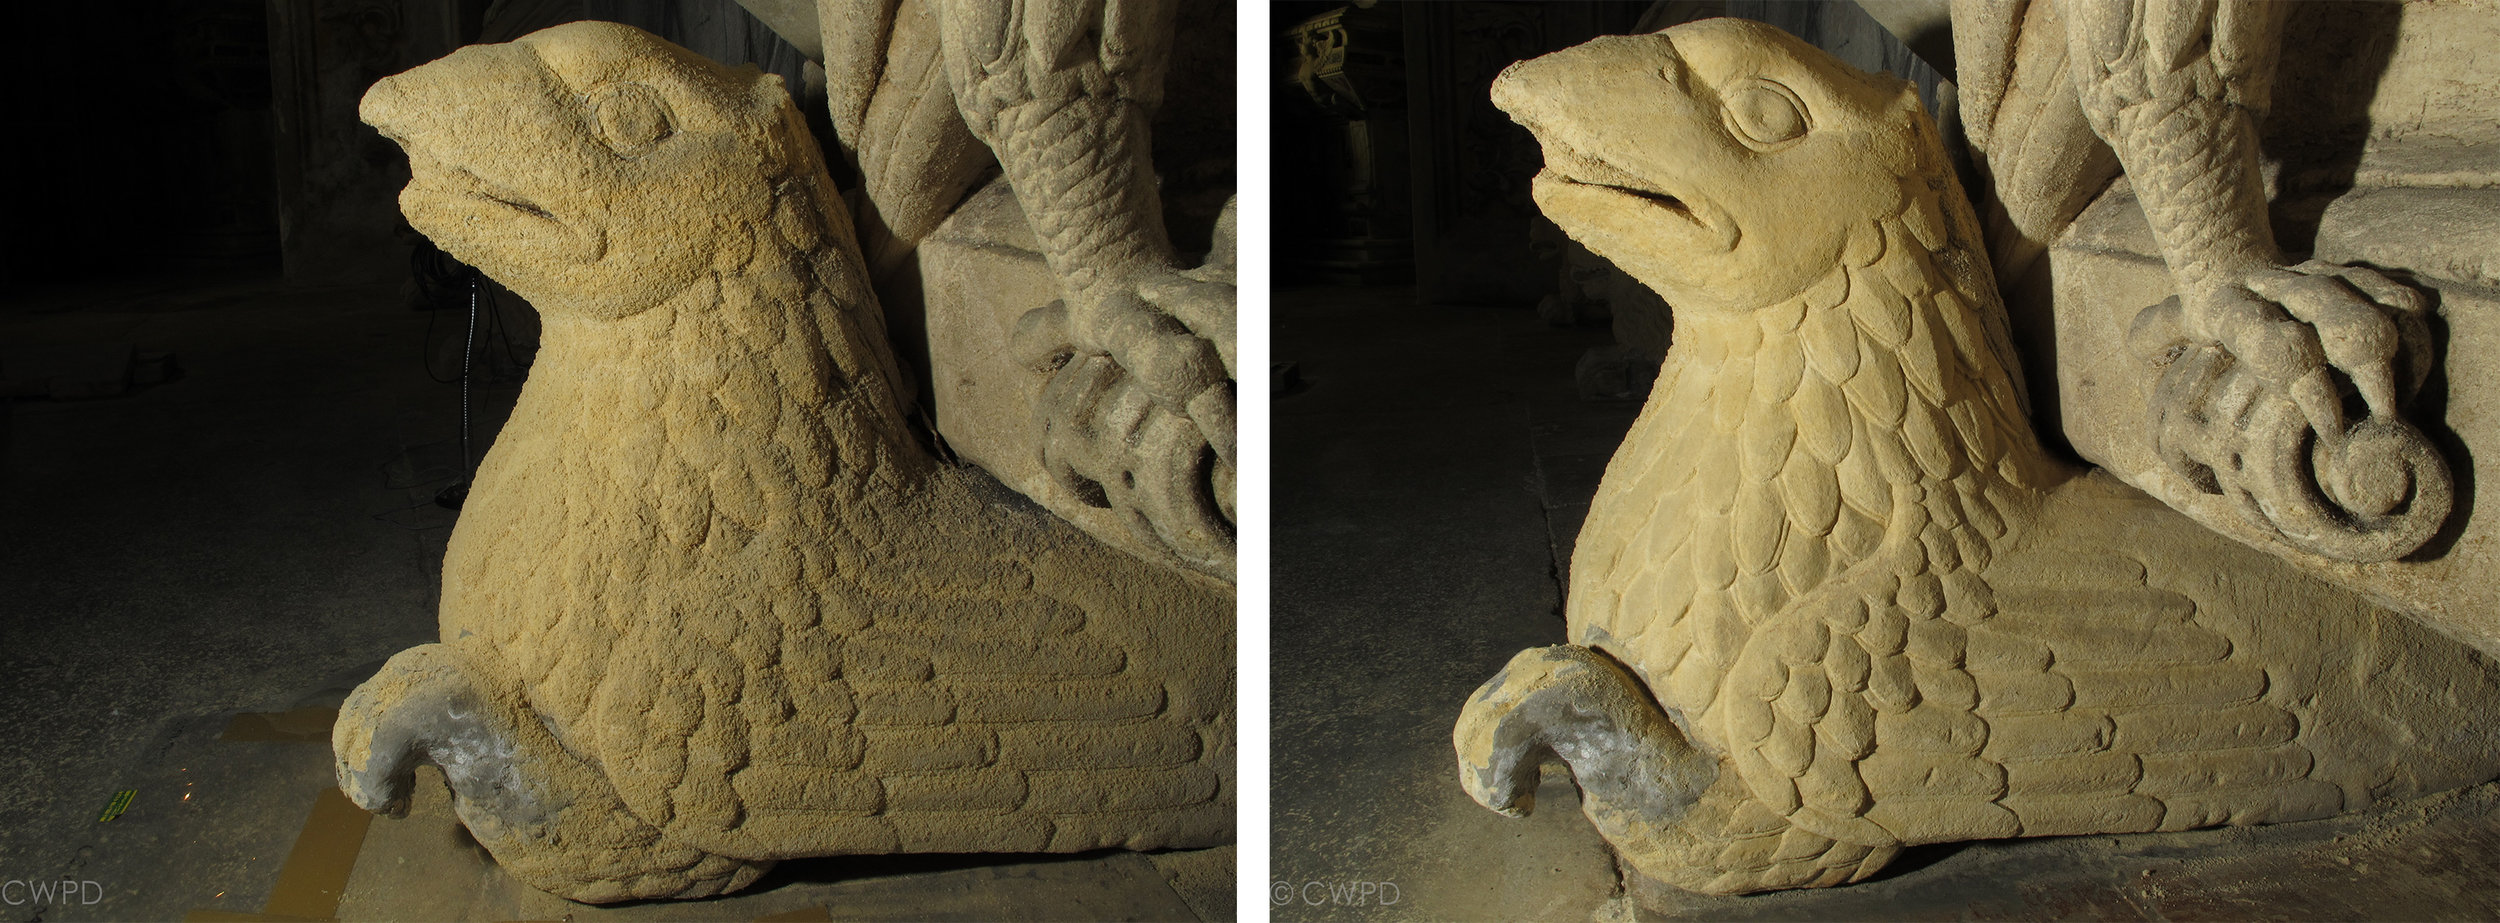  Detail of the limestone tomb monuments before (left) and after (right) consolidation and cleaning.&nbsp;  Image © Courtauld CWPD 